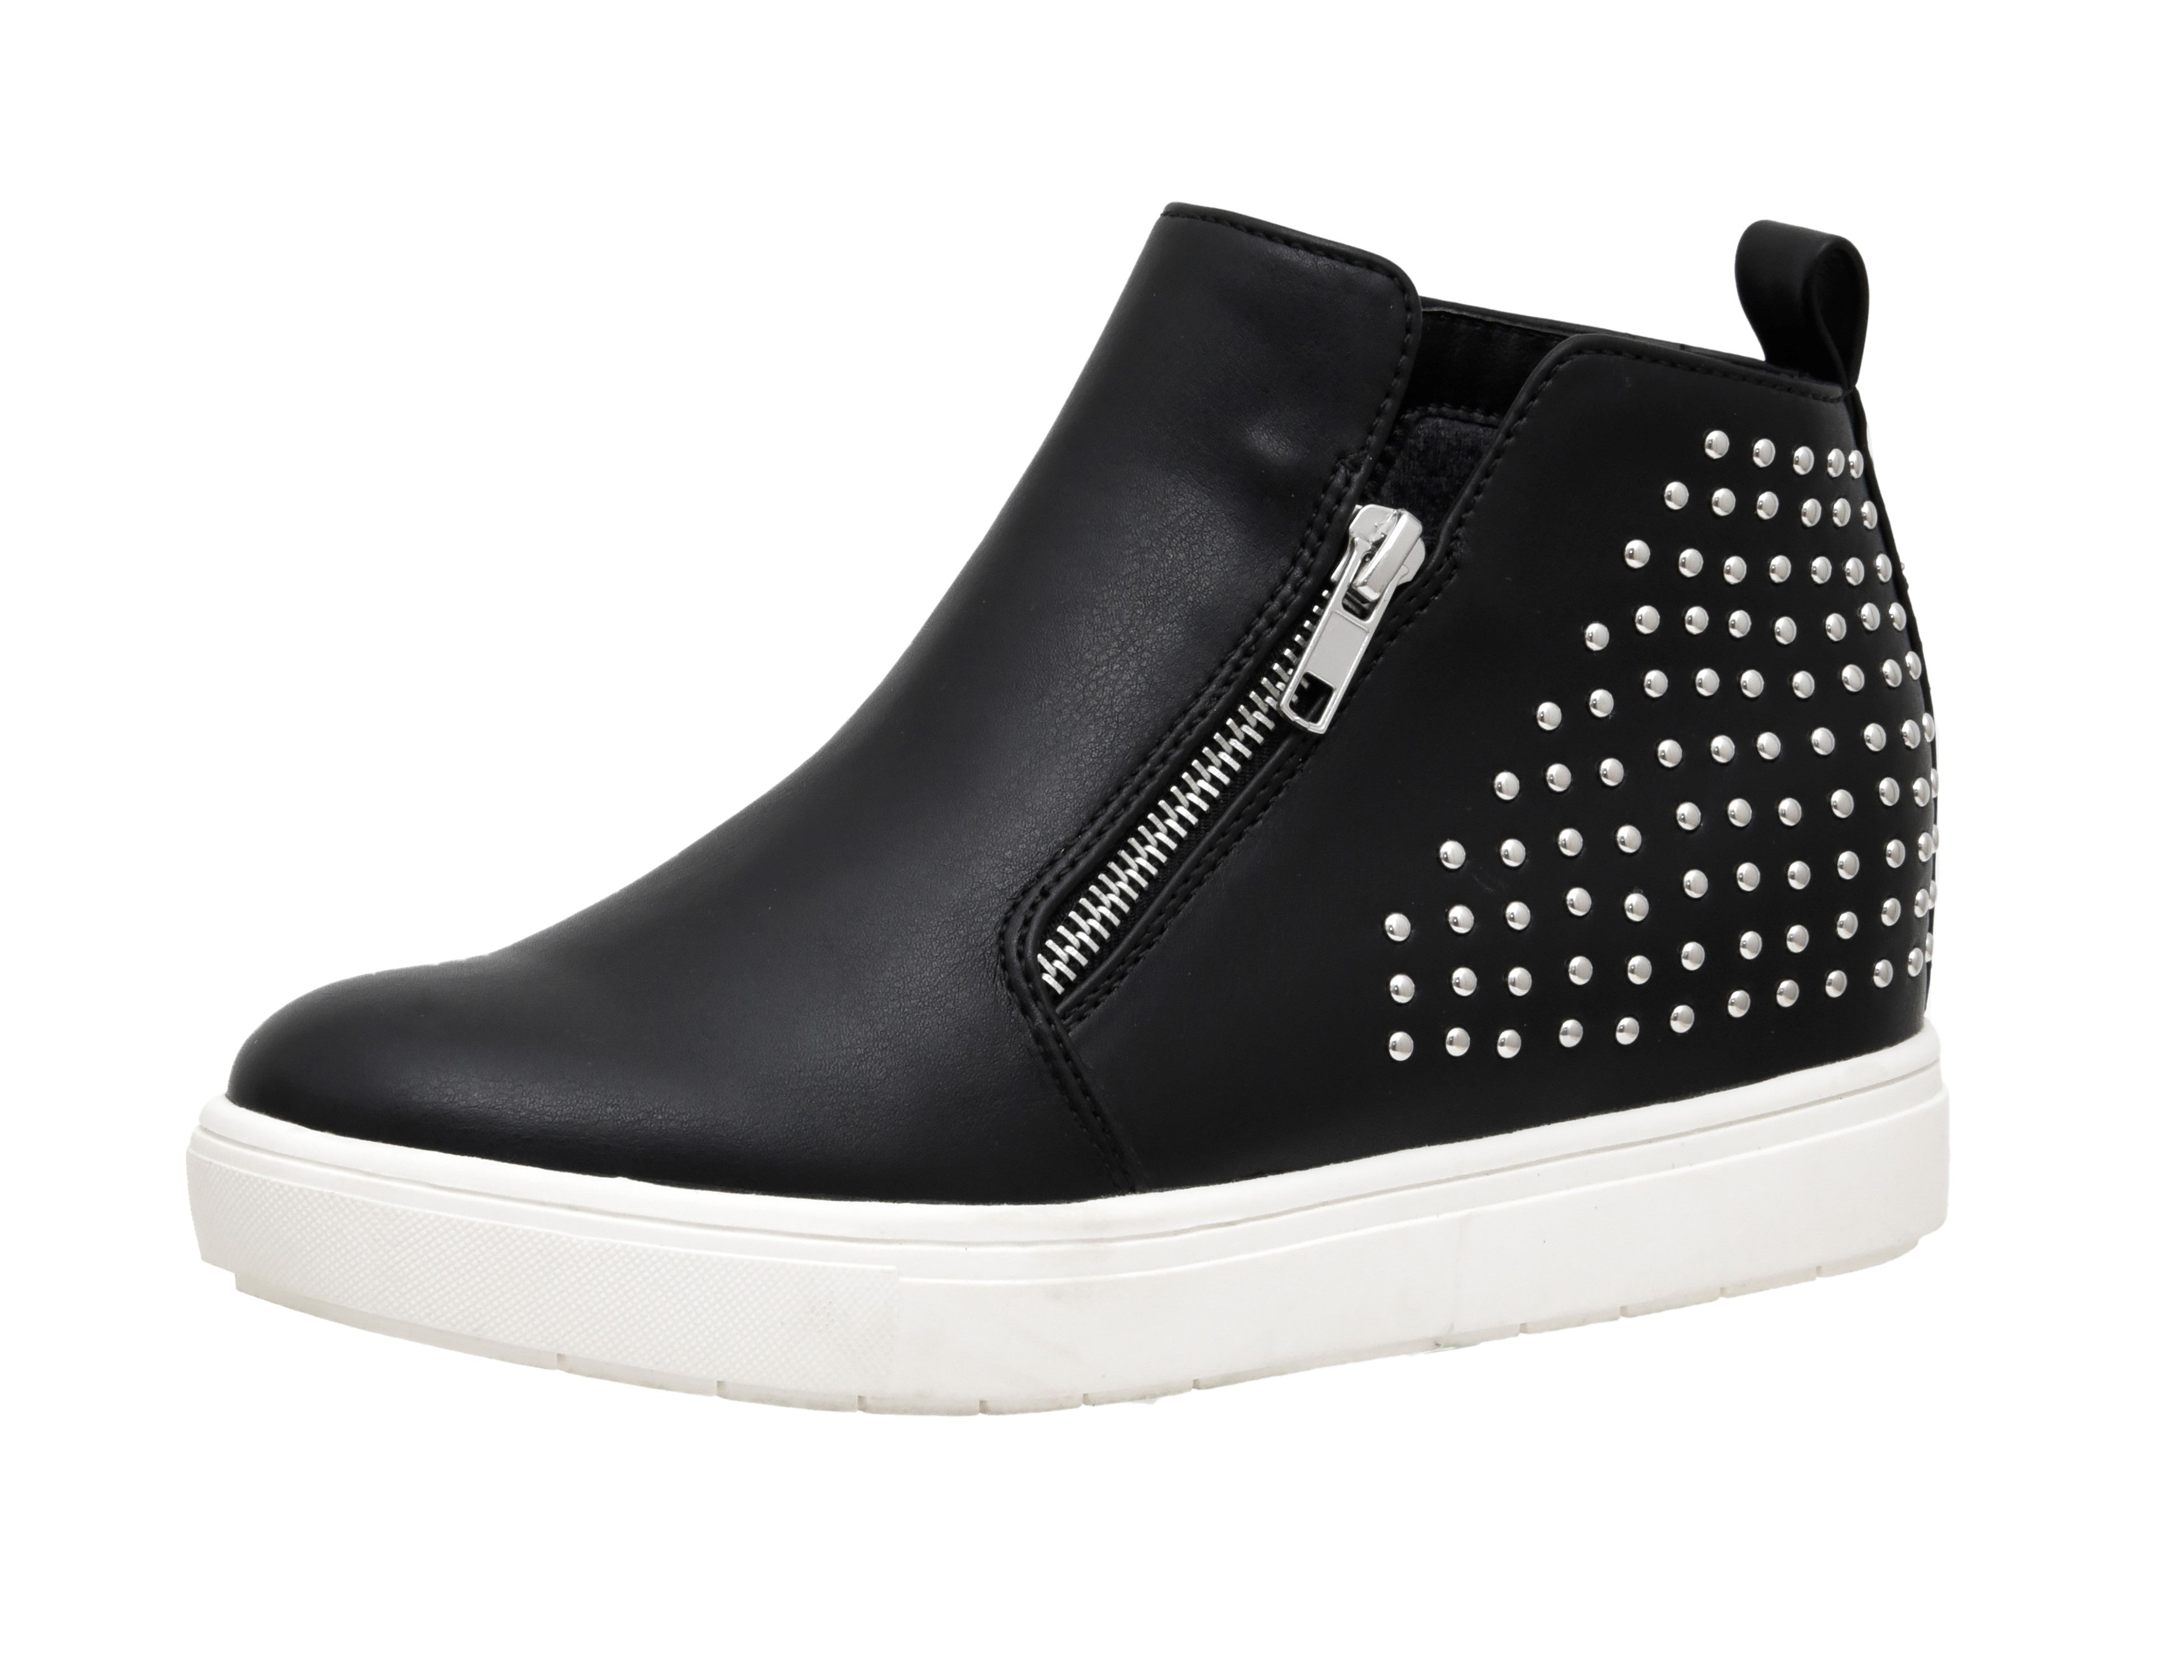 Hollywood Studded Wedge Sneaker